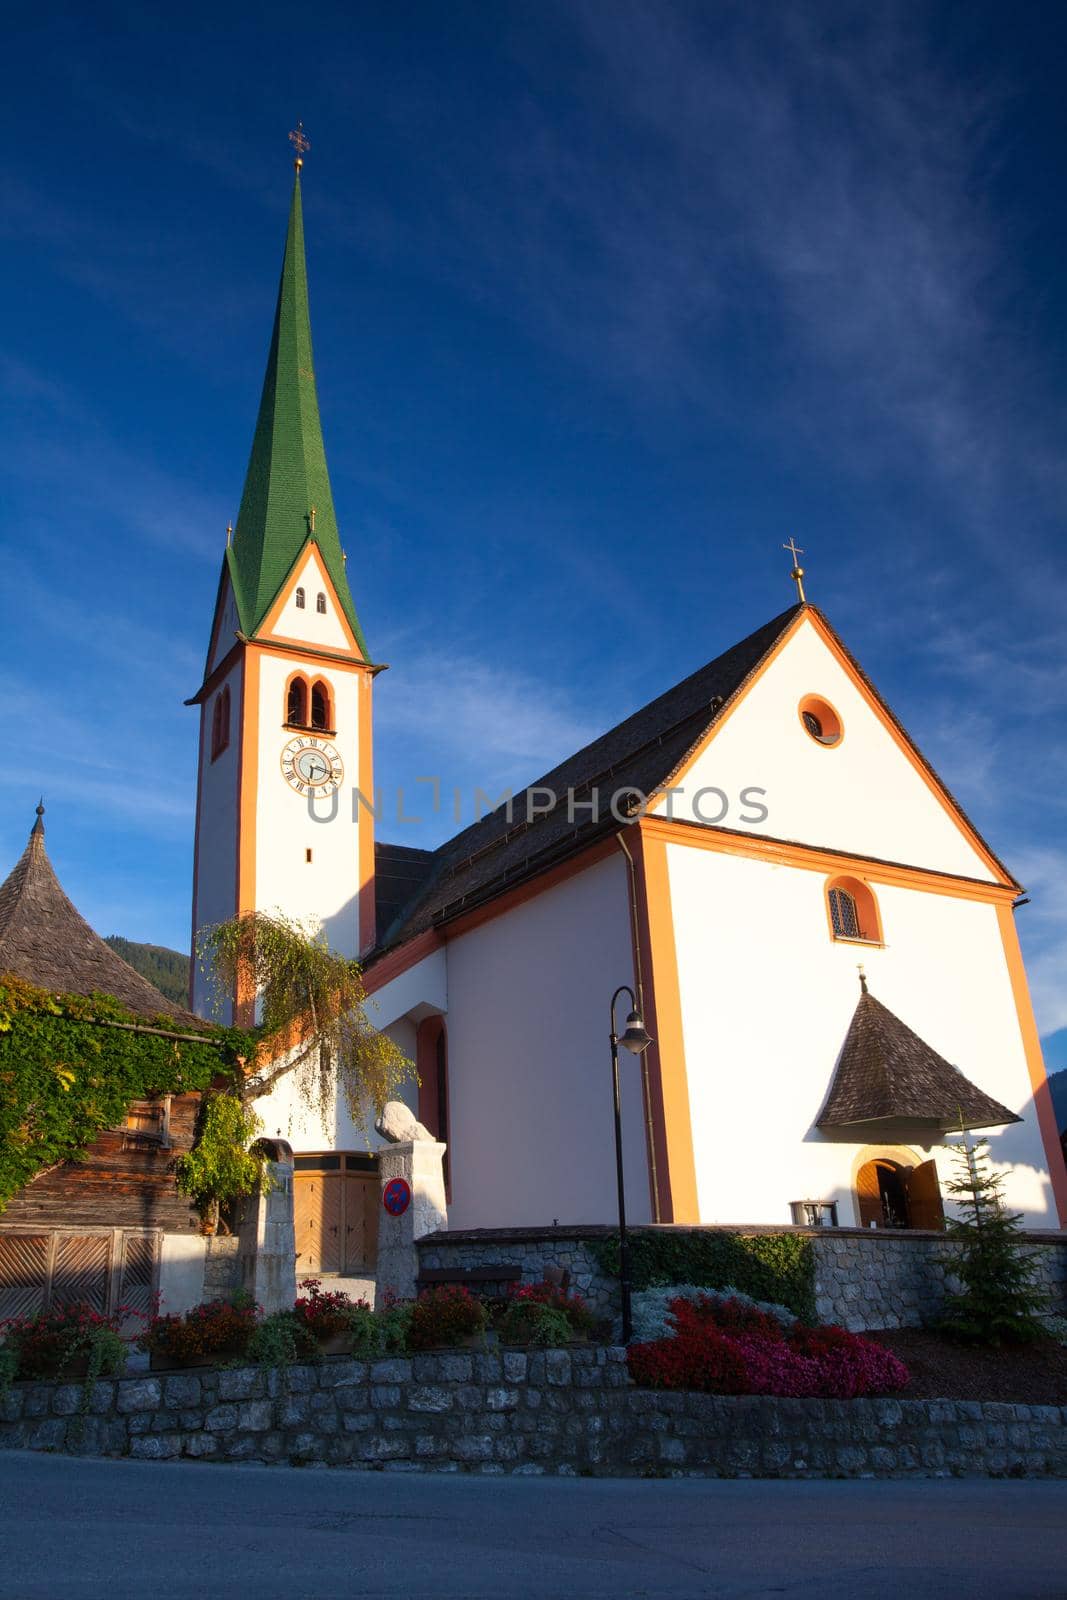 St. Oswald Parish Church in Alpbach,Austria. The church was first mentioned in 1369, a larger one was built in 1420 in honor of St. Oswald, a Northumbrian king.